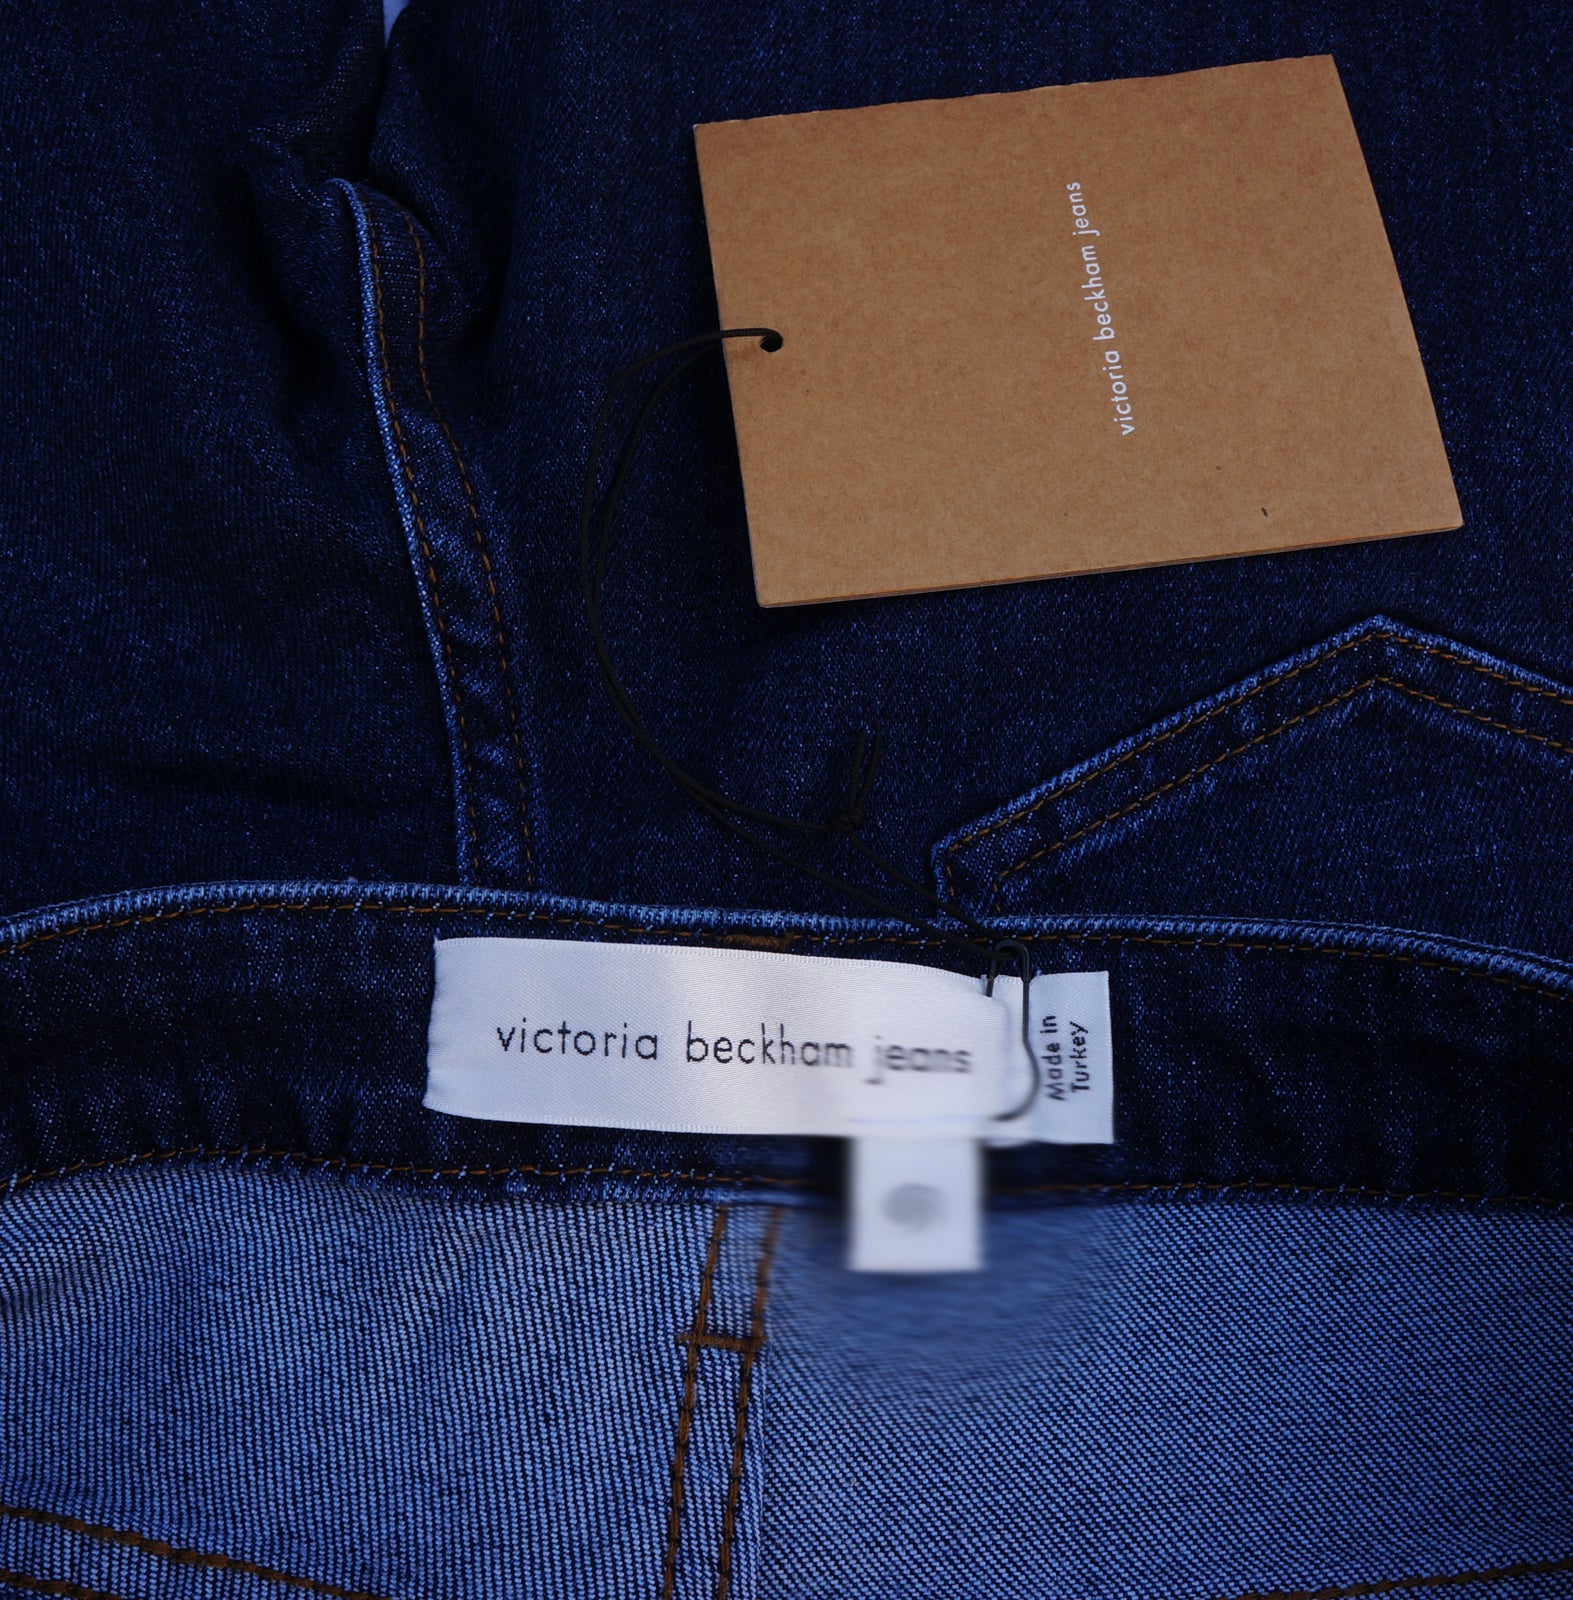 VICTORIA BECKHAM HIGH-RISE SKINNY JEANS NEW WITHOUT TAGS 27 - leefluxury.com